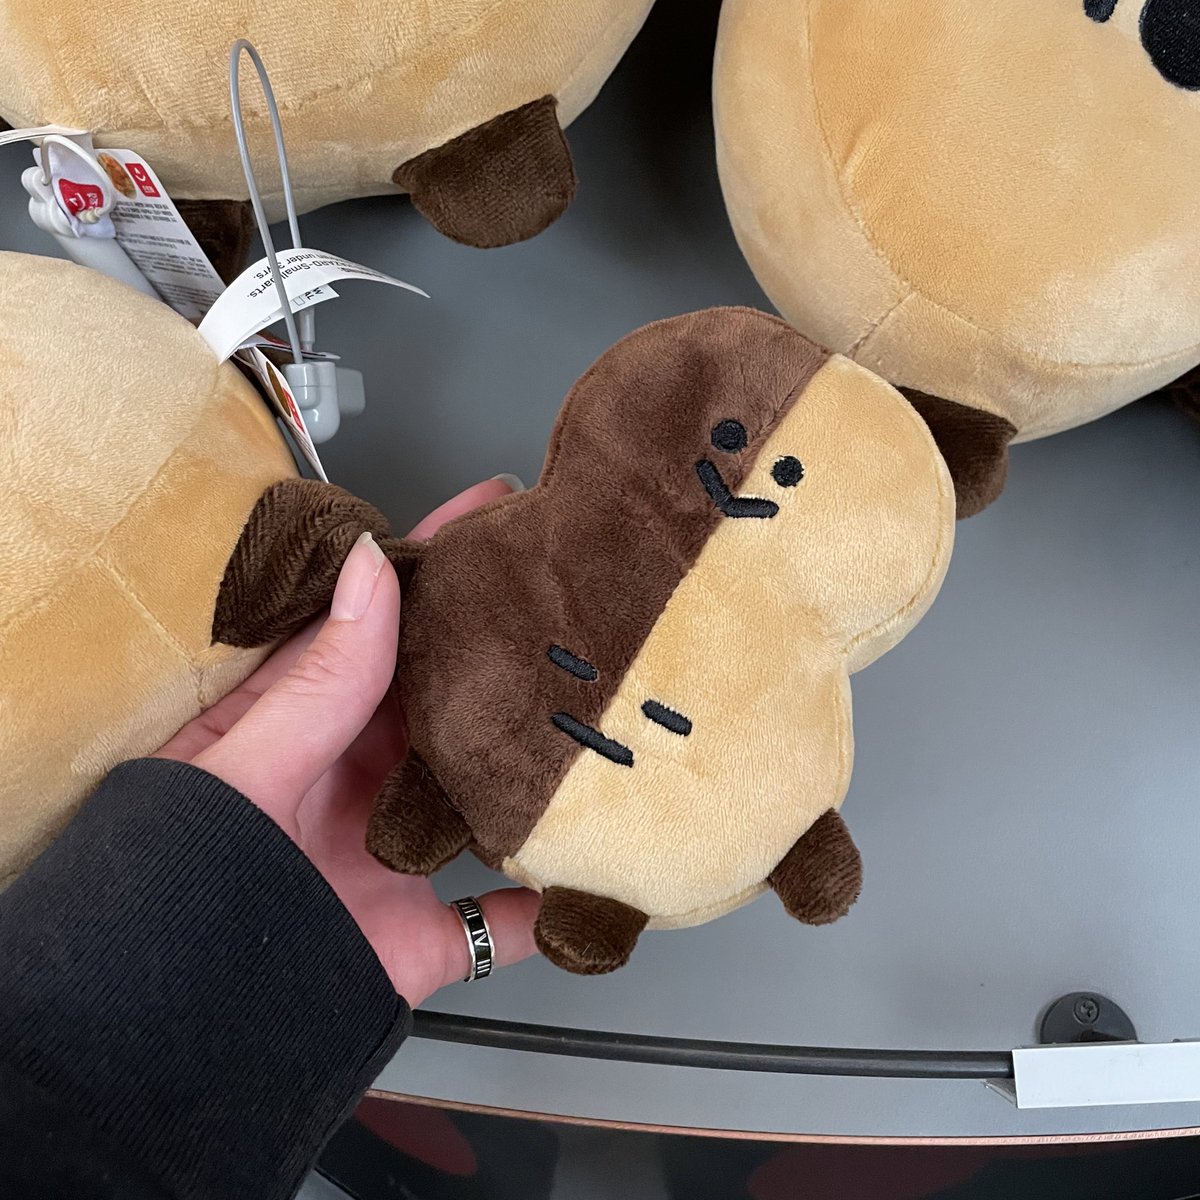 BIG HELSINKI PLUSH if they sold this years ago I would’ve bought it immediately, my lil guy https://t.co/K7WxJWD70E